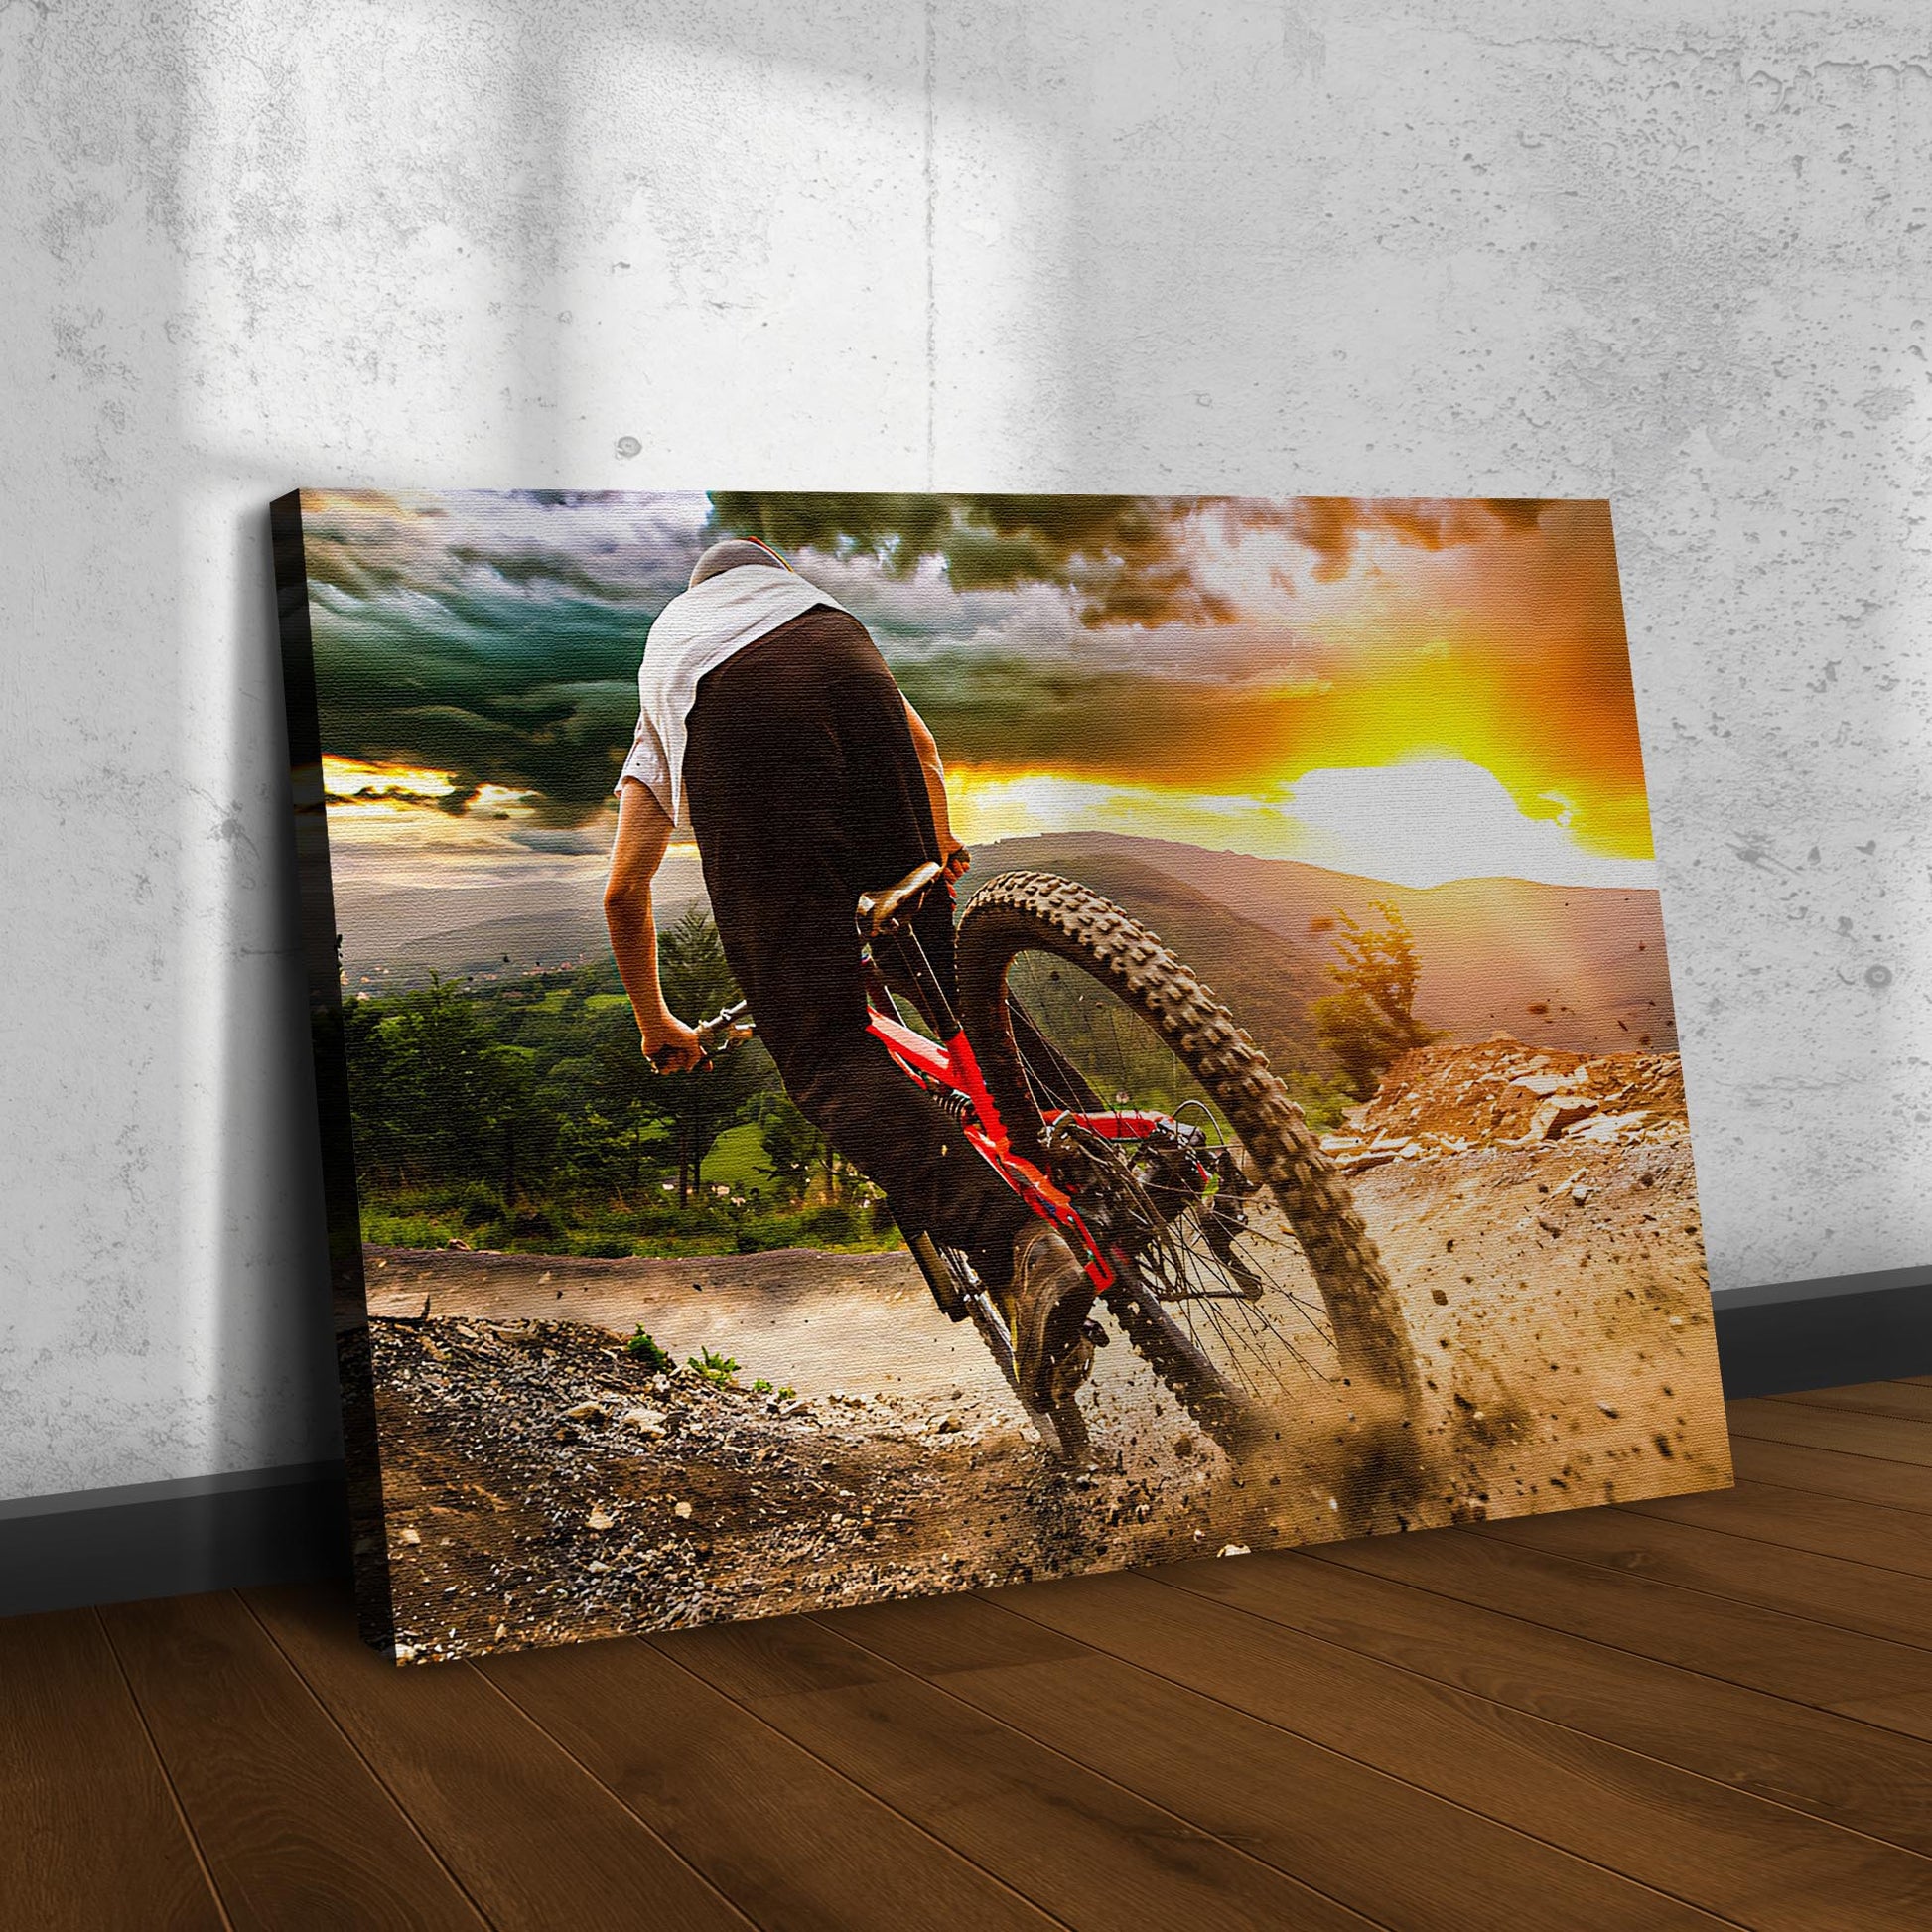 Cycling On Dirt Road Canvas Wall Art Style 2 - Image by Tailored Canvases